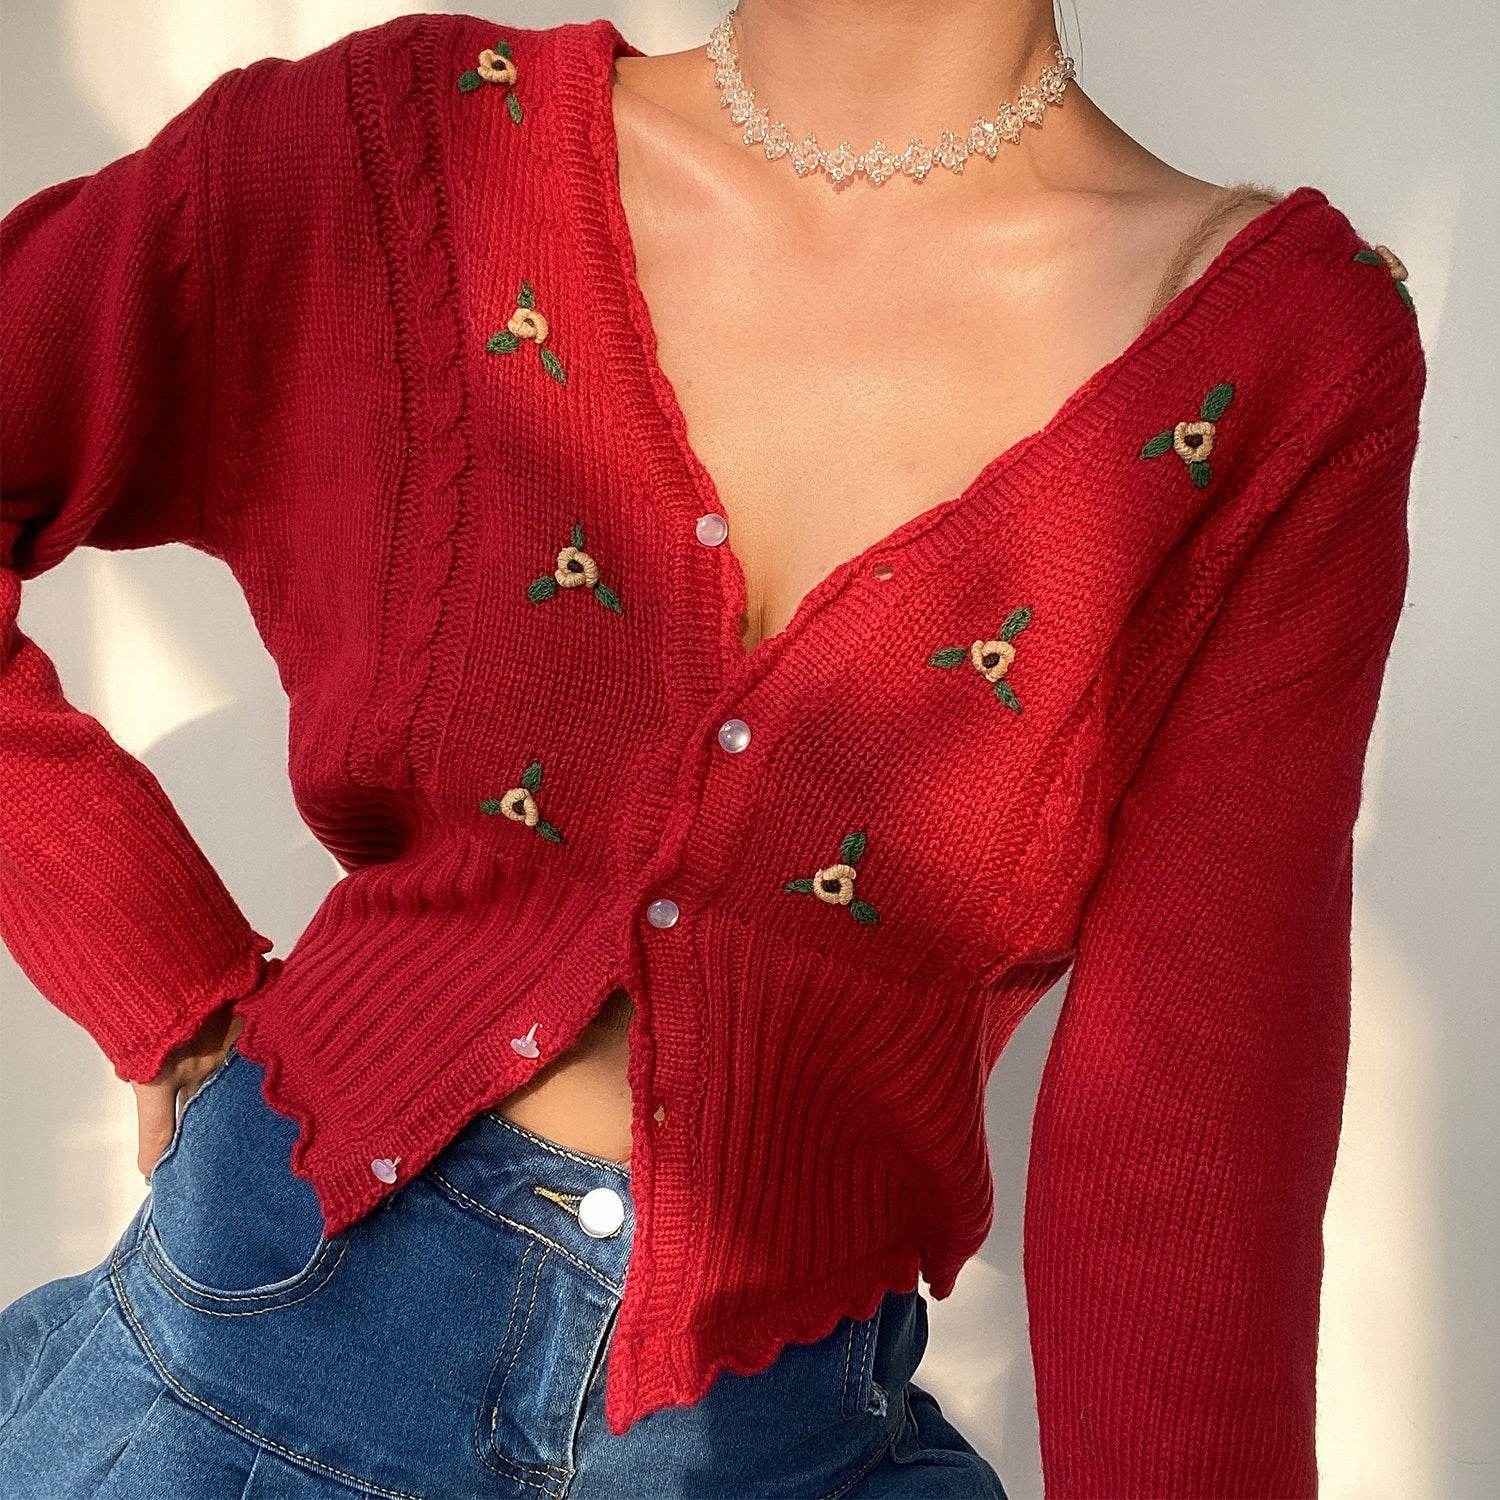 Retro French V-neck Cute Wooden Ears Crochet-breasted Slim Long Sleeve Knit Cardigan Top